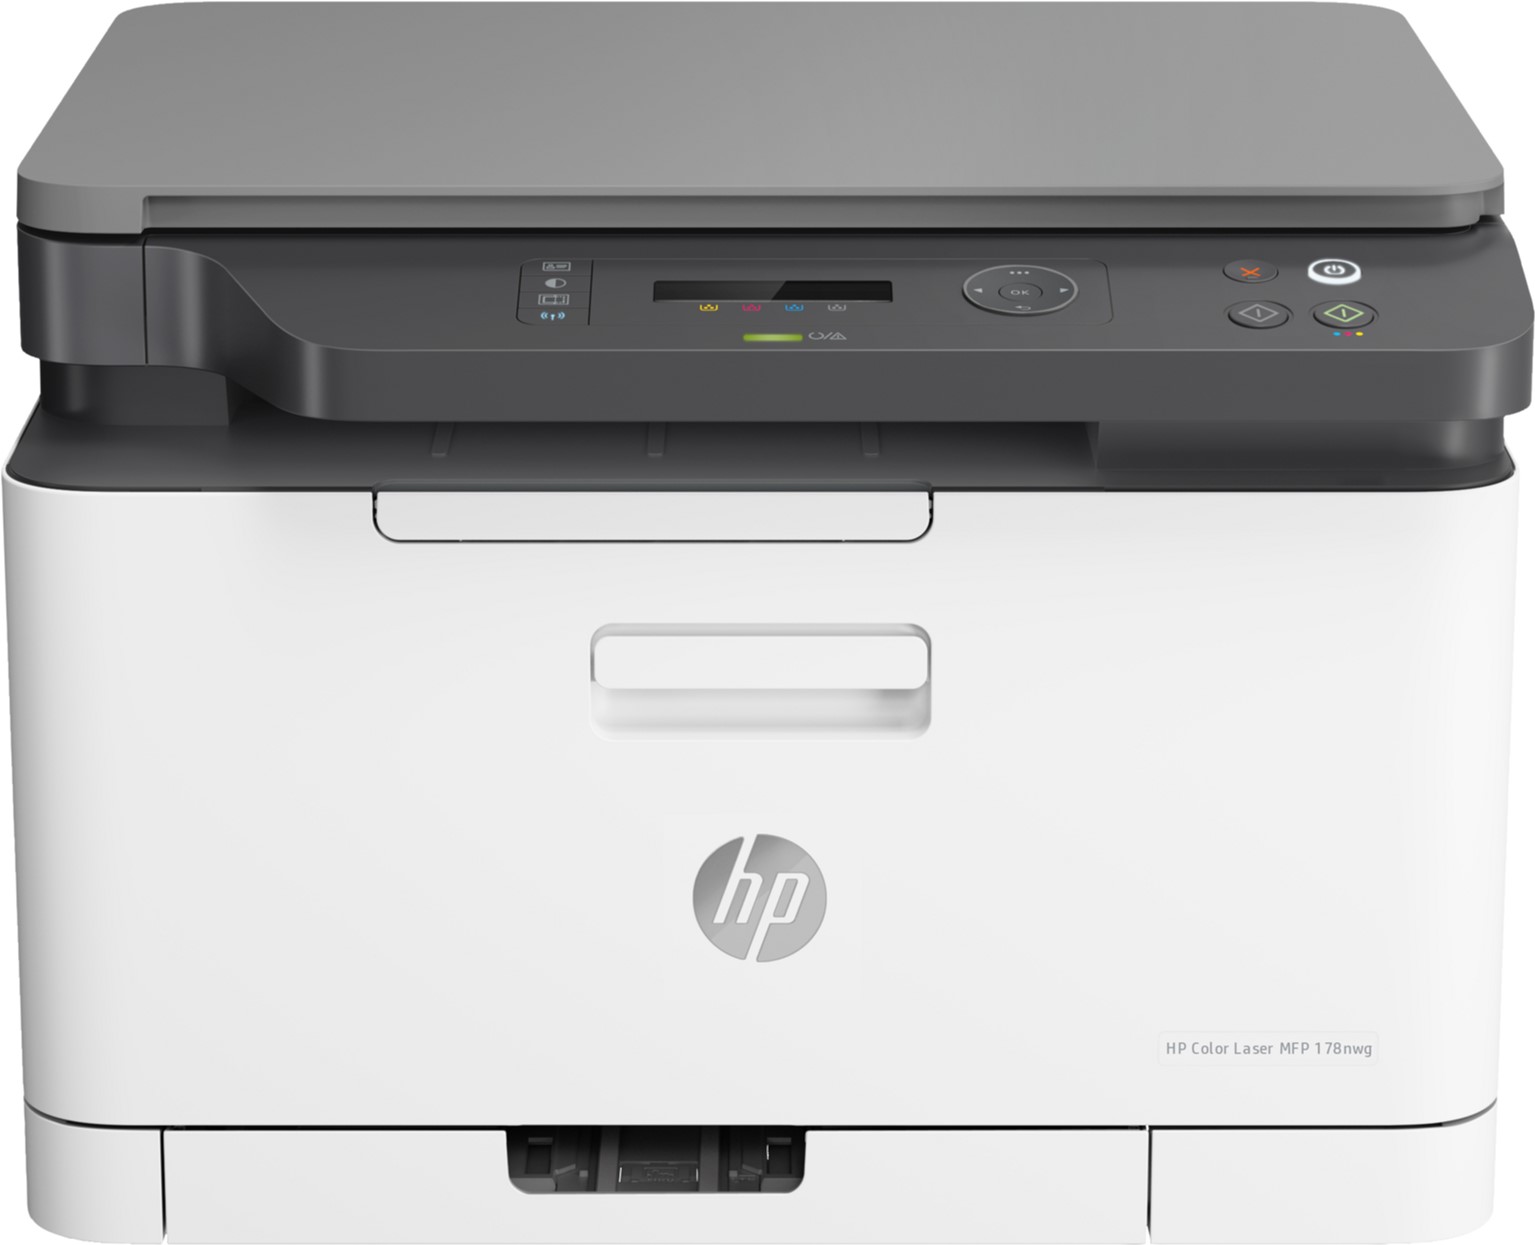 Прошивка HP Color Laser 178NW / 178NWG